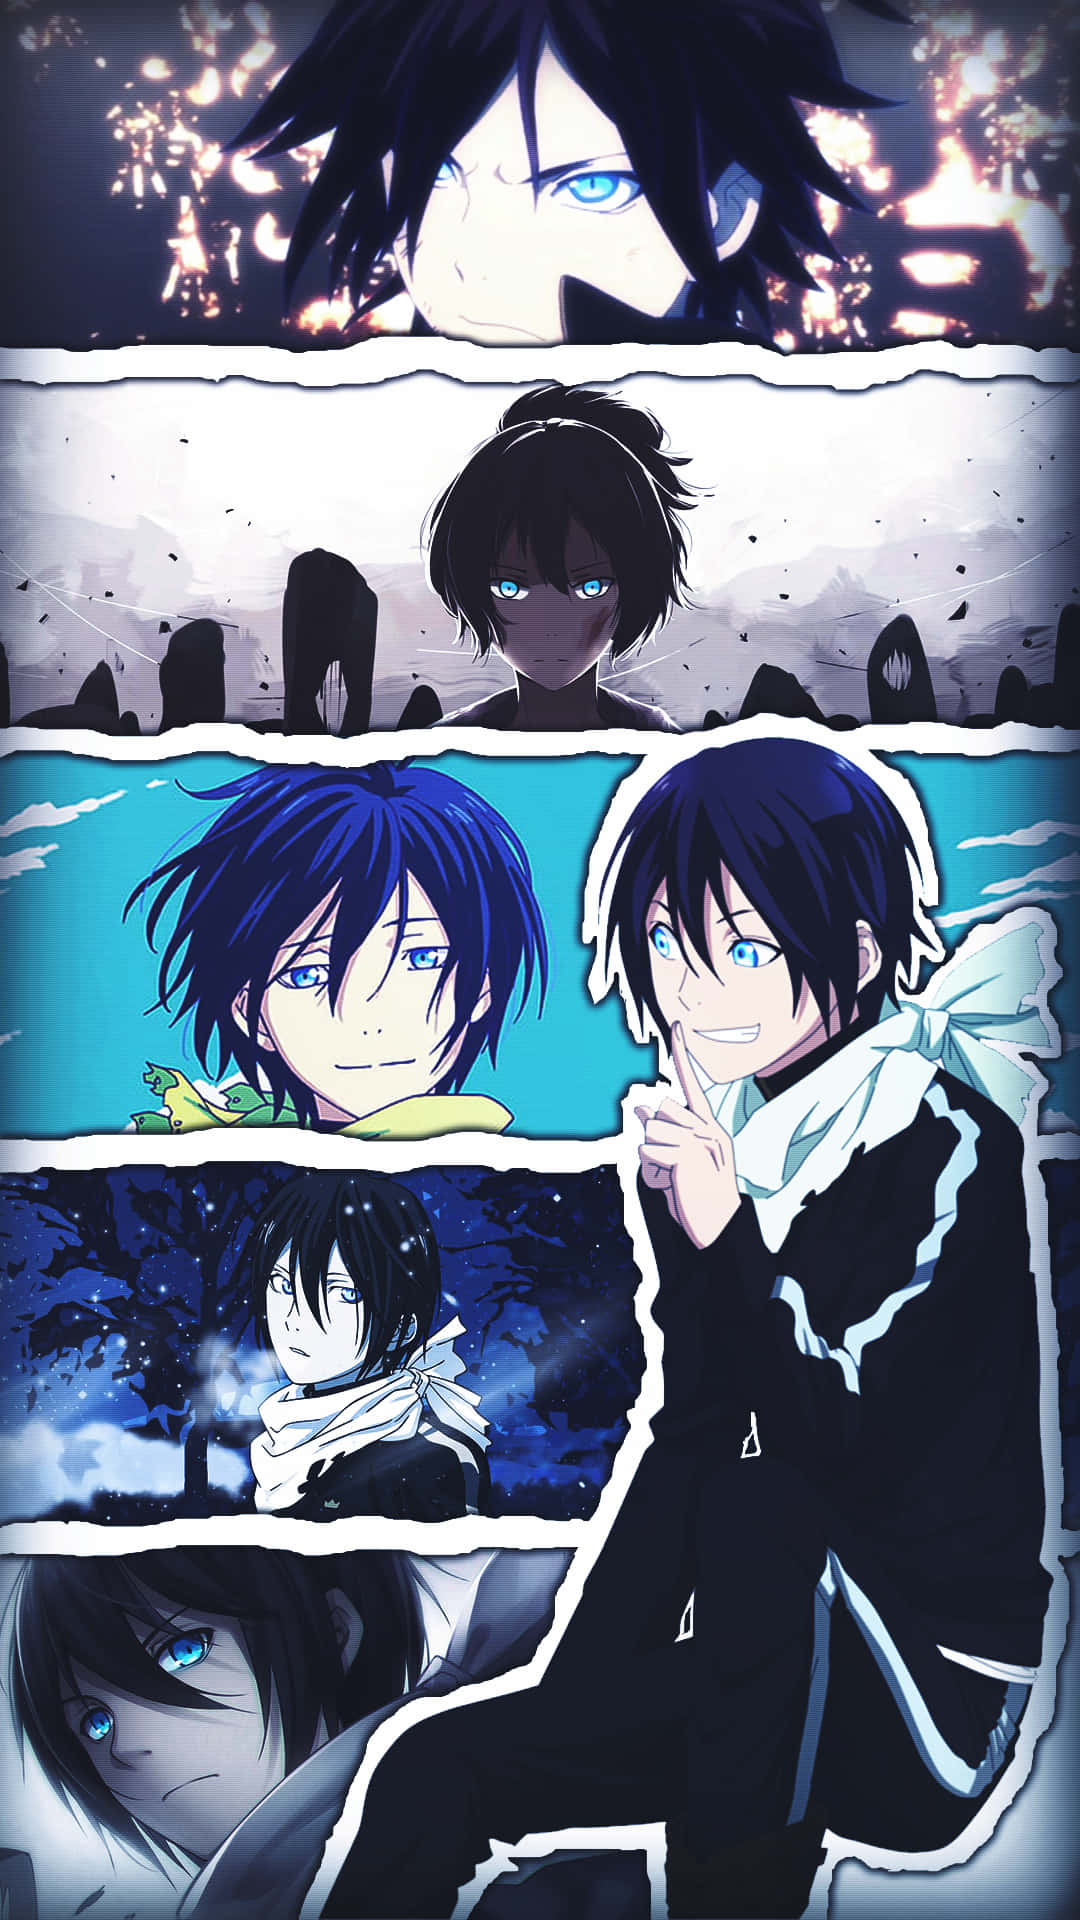 Discover the Spirit World with Noragami